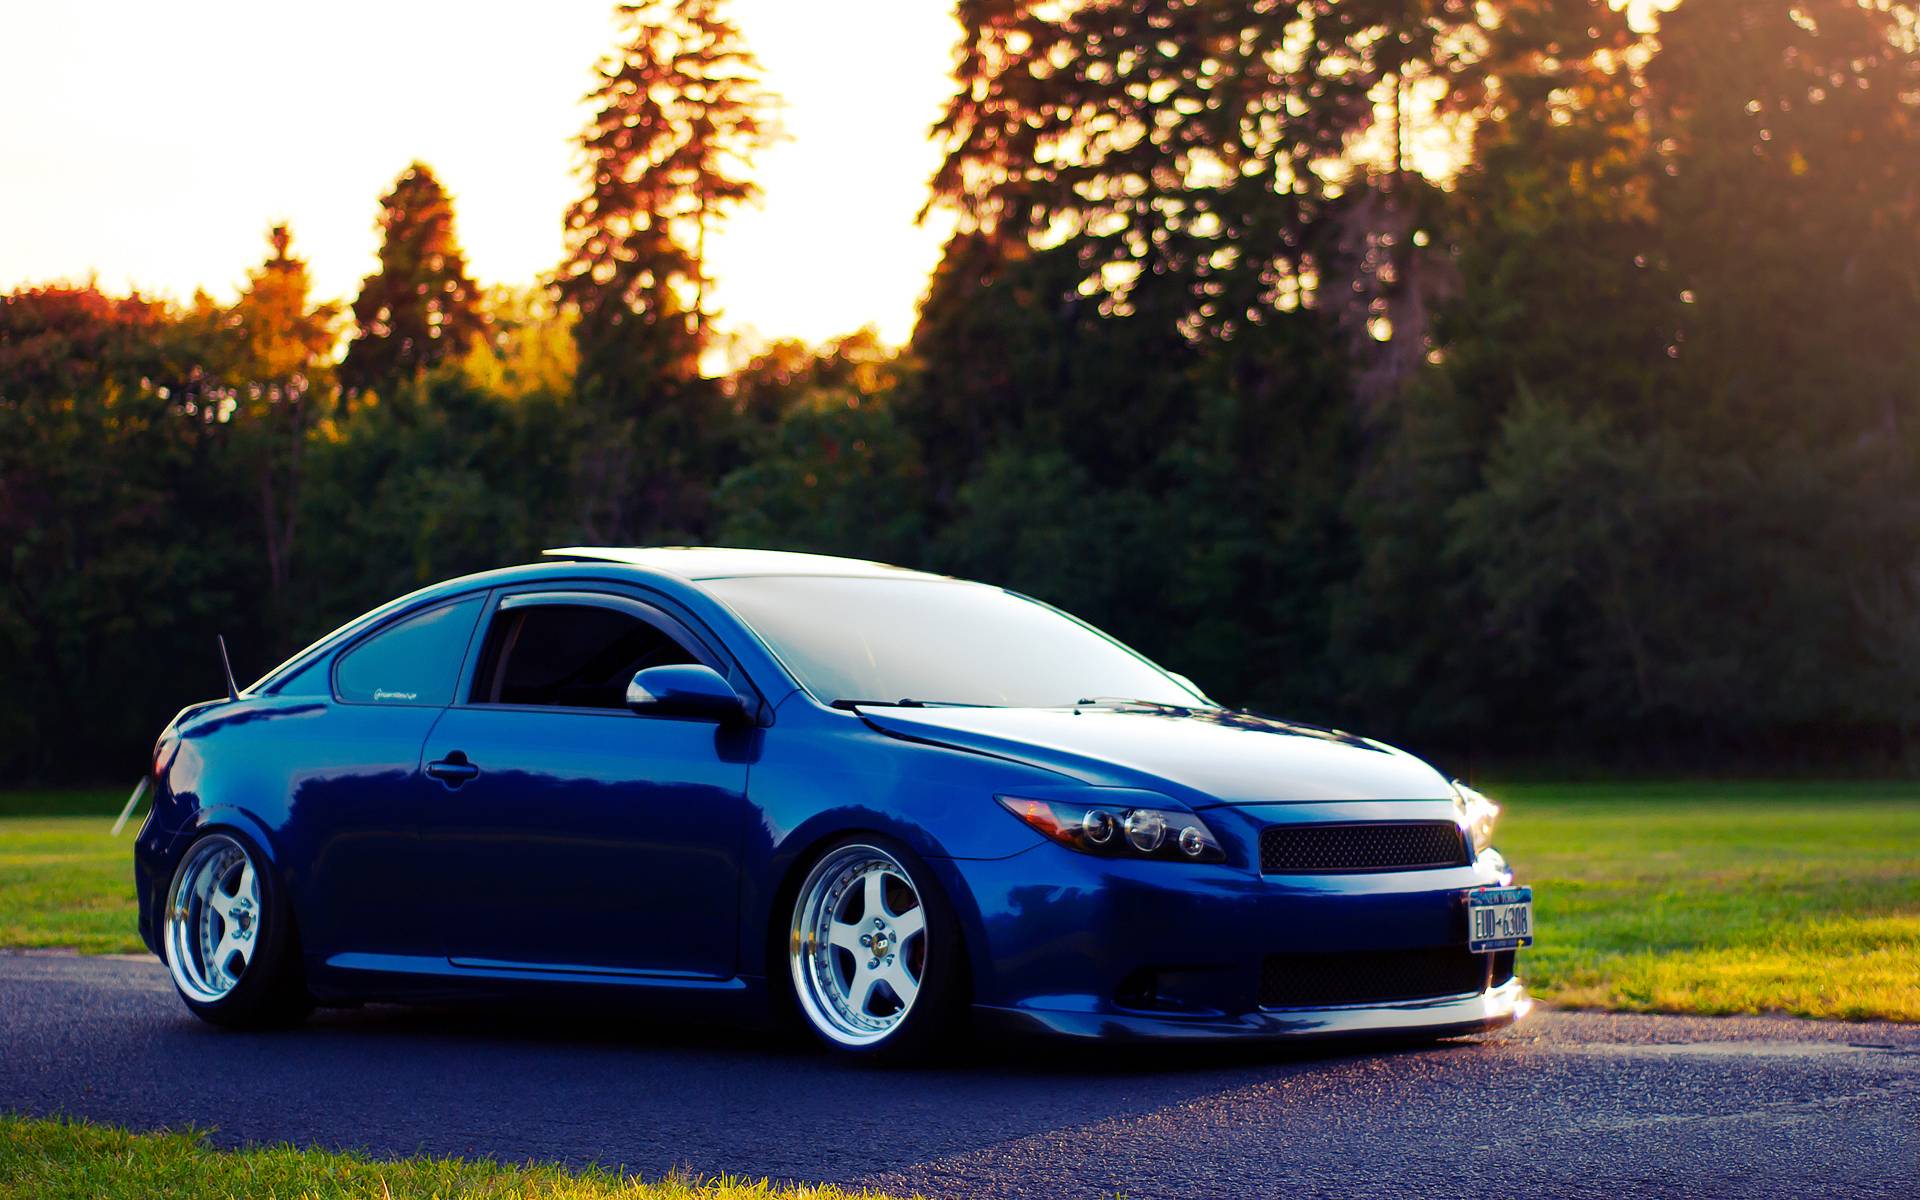 Scion Tc Tuning Canibeat Stance HD Wallpaper Definition